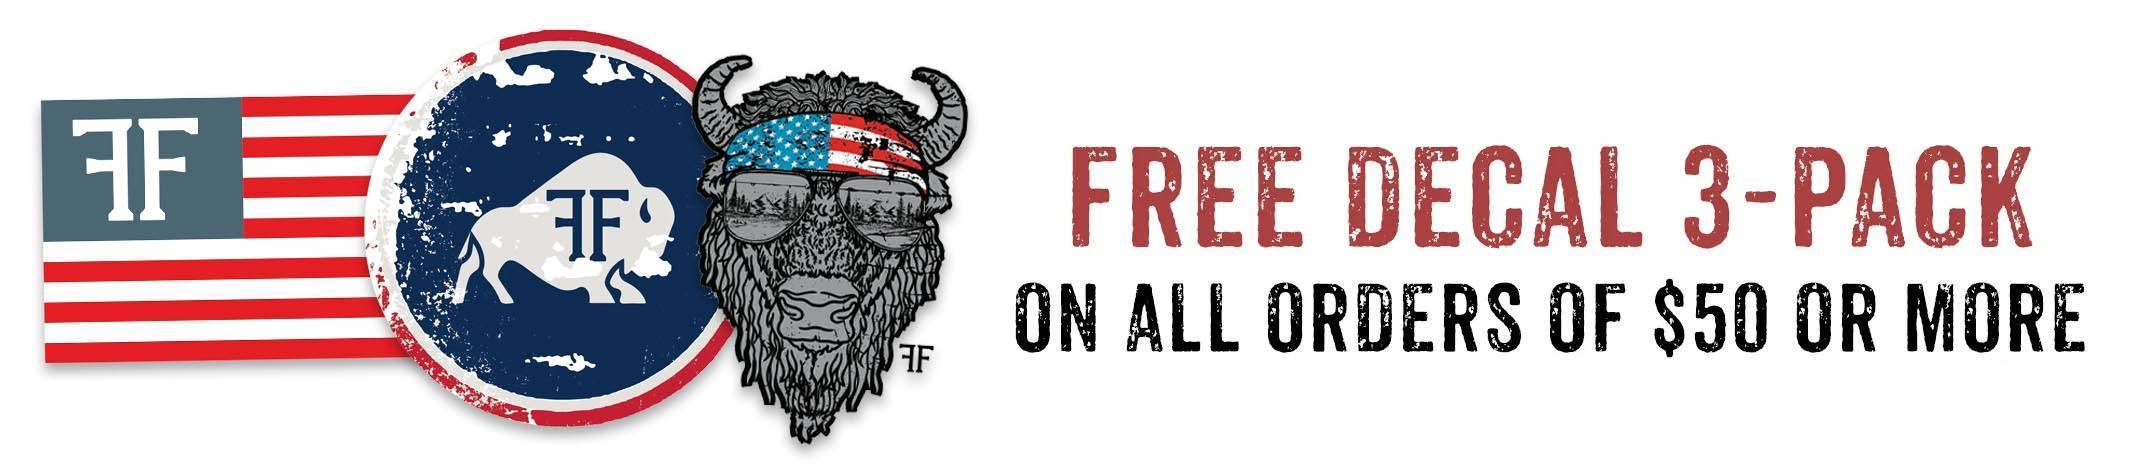 free decale 3 pack bison froning farms